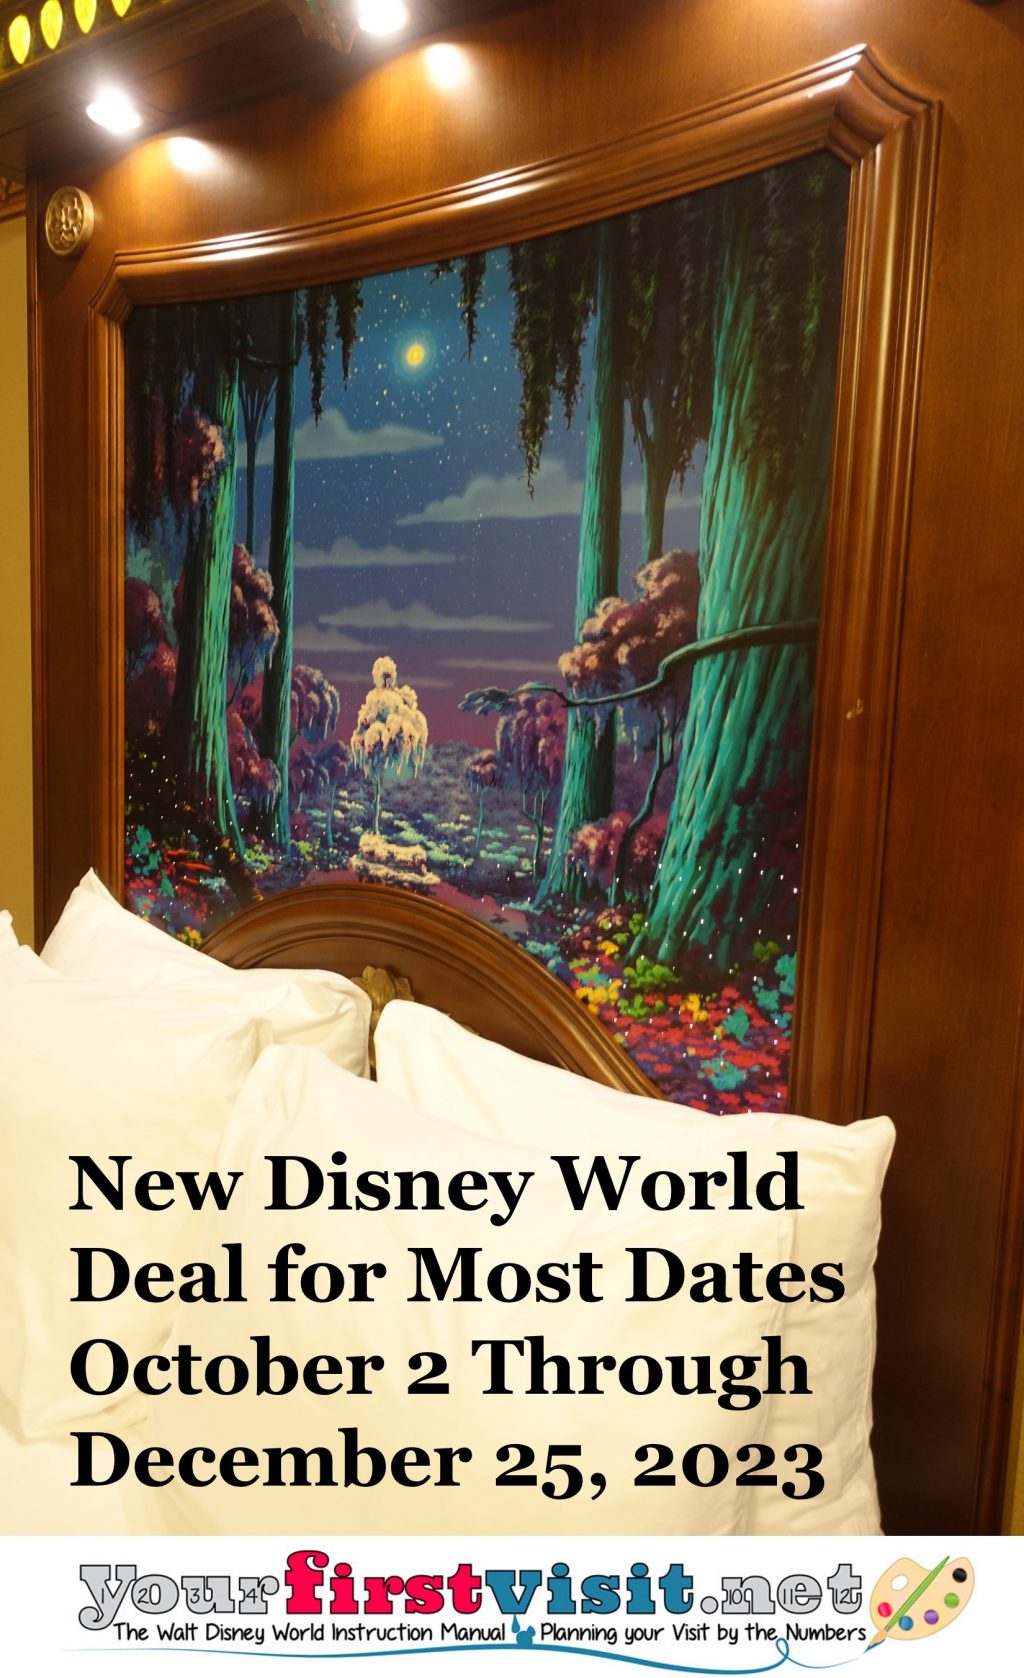 Disney World Room Rate Deal For Most Dates from October 2 through